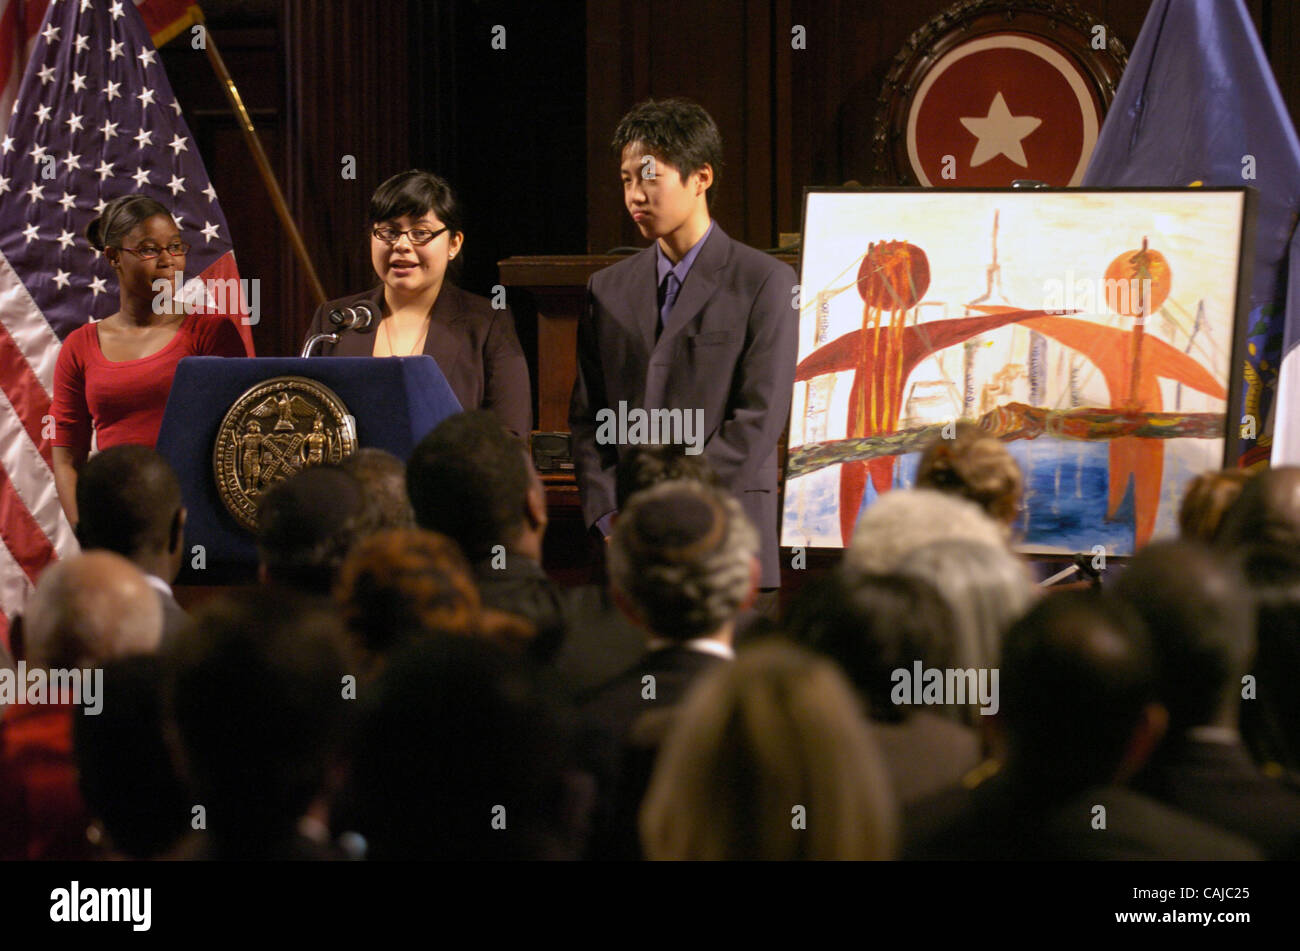 Youth Bridge-NY fellows Suewayne Burke and Kevin Li look on as Nancy Trujillo (C) describes the painting (R) she made. Breakfast reception to commemorate the birthday of Dr. Martin Luther King, Jr. hosted by Mayor Michael Bloomberg at City Council Chambers, City Hall. Stock Photo